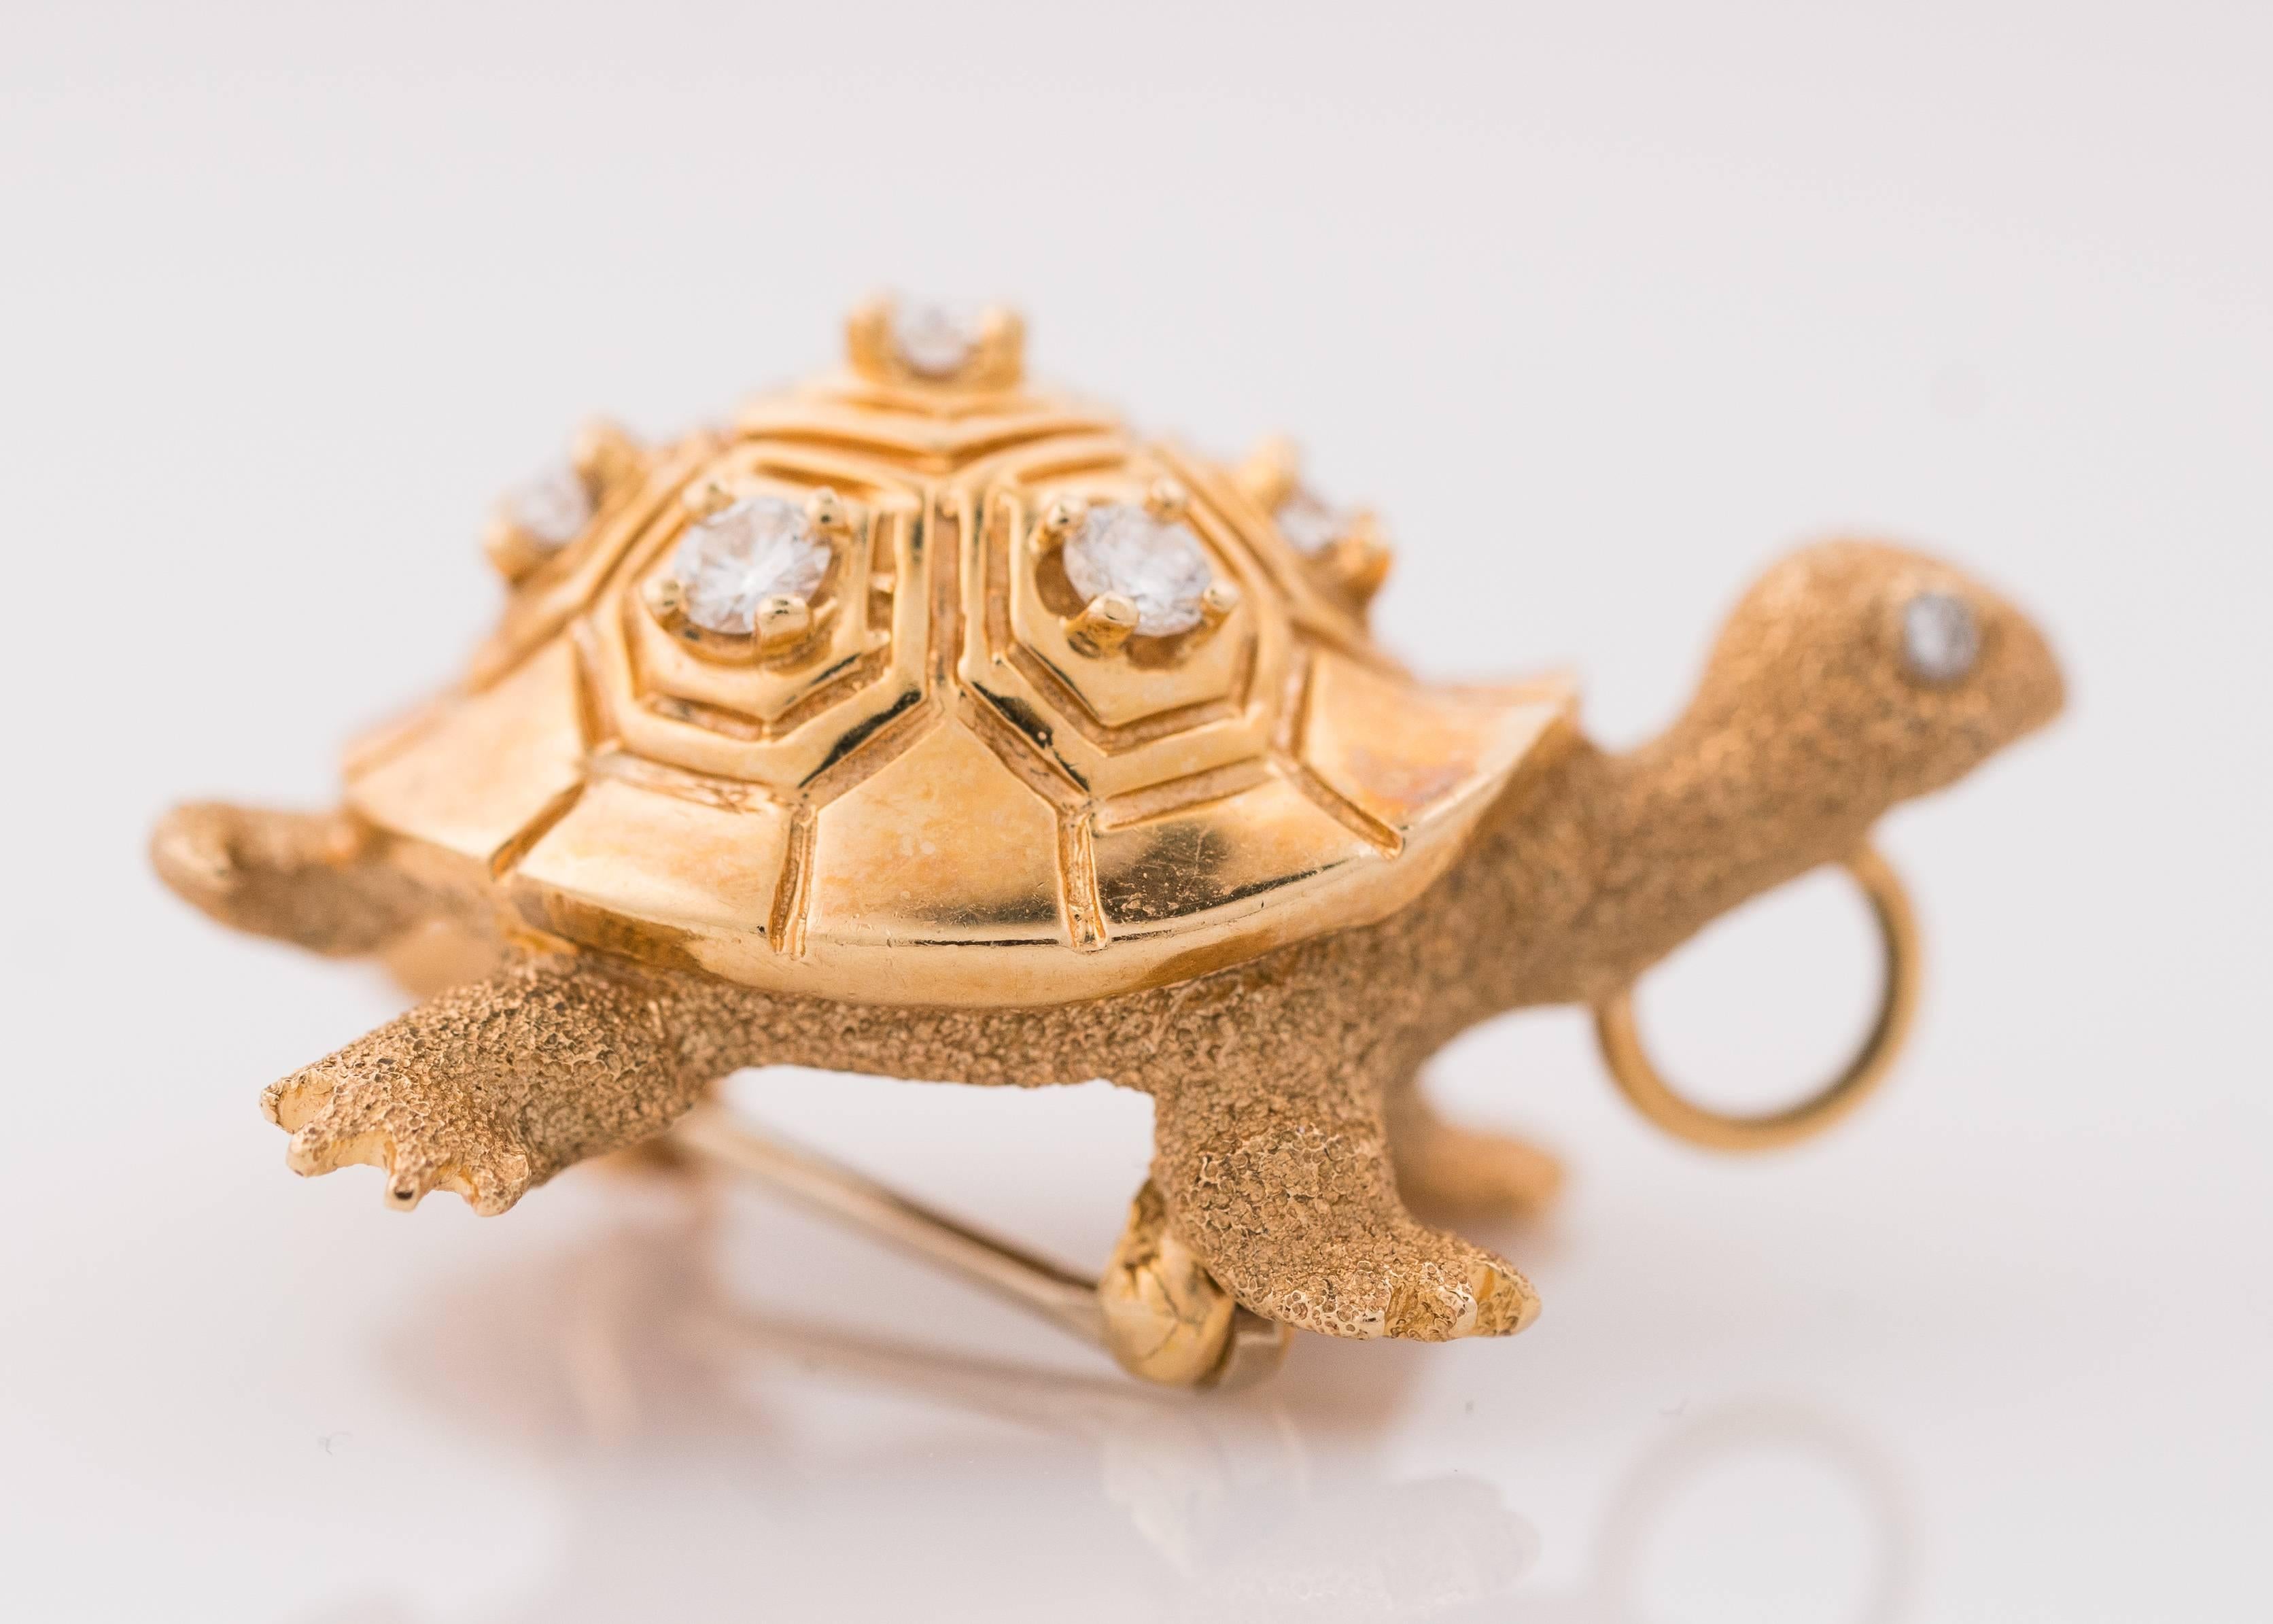 1950s Turtle Brooch, 14K Yellow Gold and Diamonds. Features .40 carats total weight of Round Brilliant Diamonds. This exquisitely detailed Turtle Pin has Sand Finish legs, head, tail and body. The high polish shell is engraved with traditional